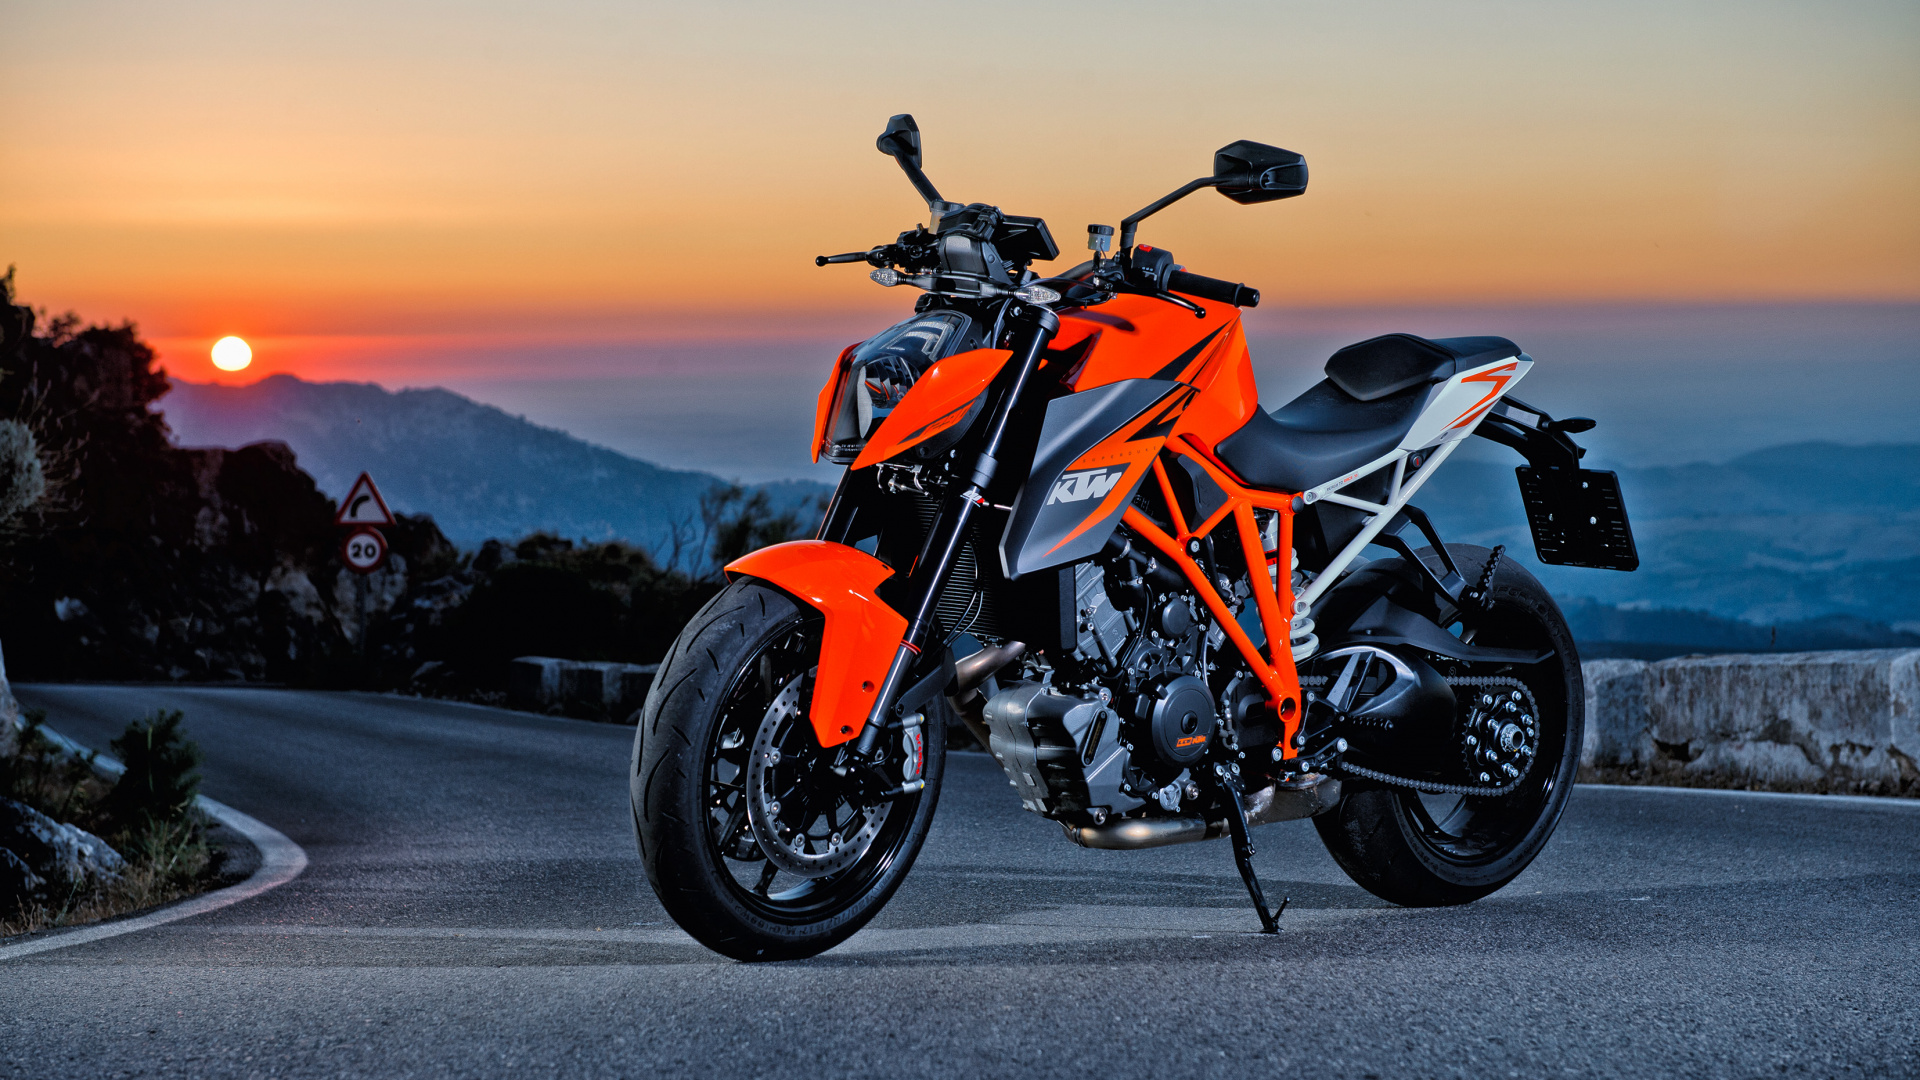 Orange and Black Sports Bike on Road During Daytime. Wallpaper in 1920x1080 Resolution